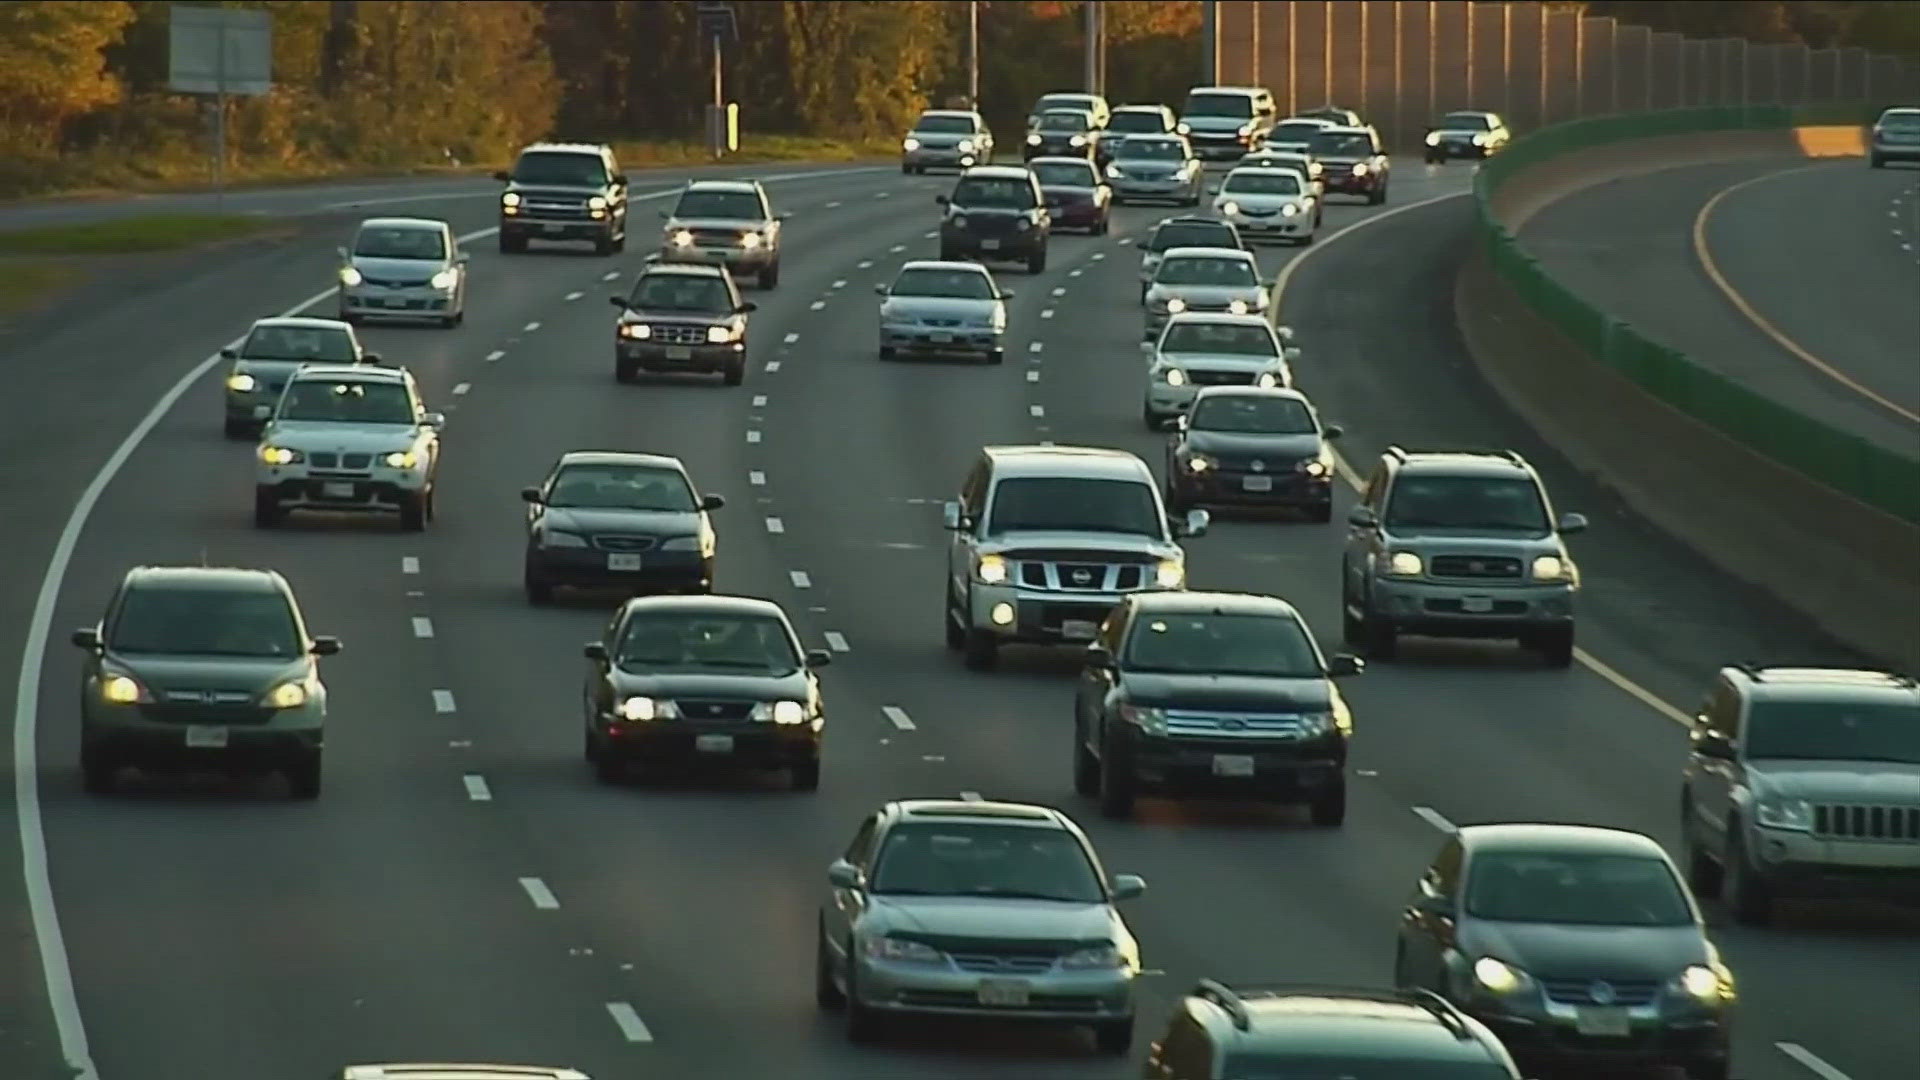 More than 60 million people taking road trips"